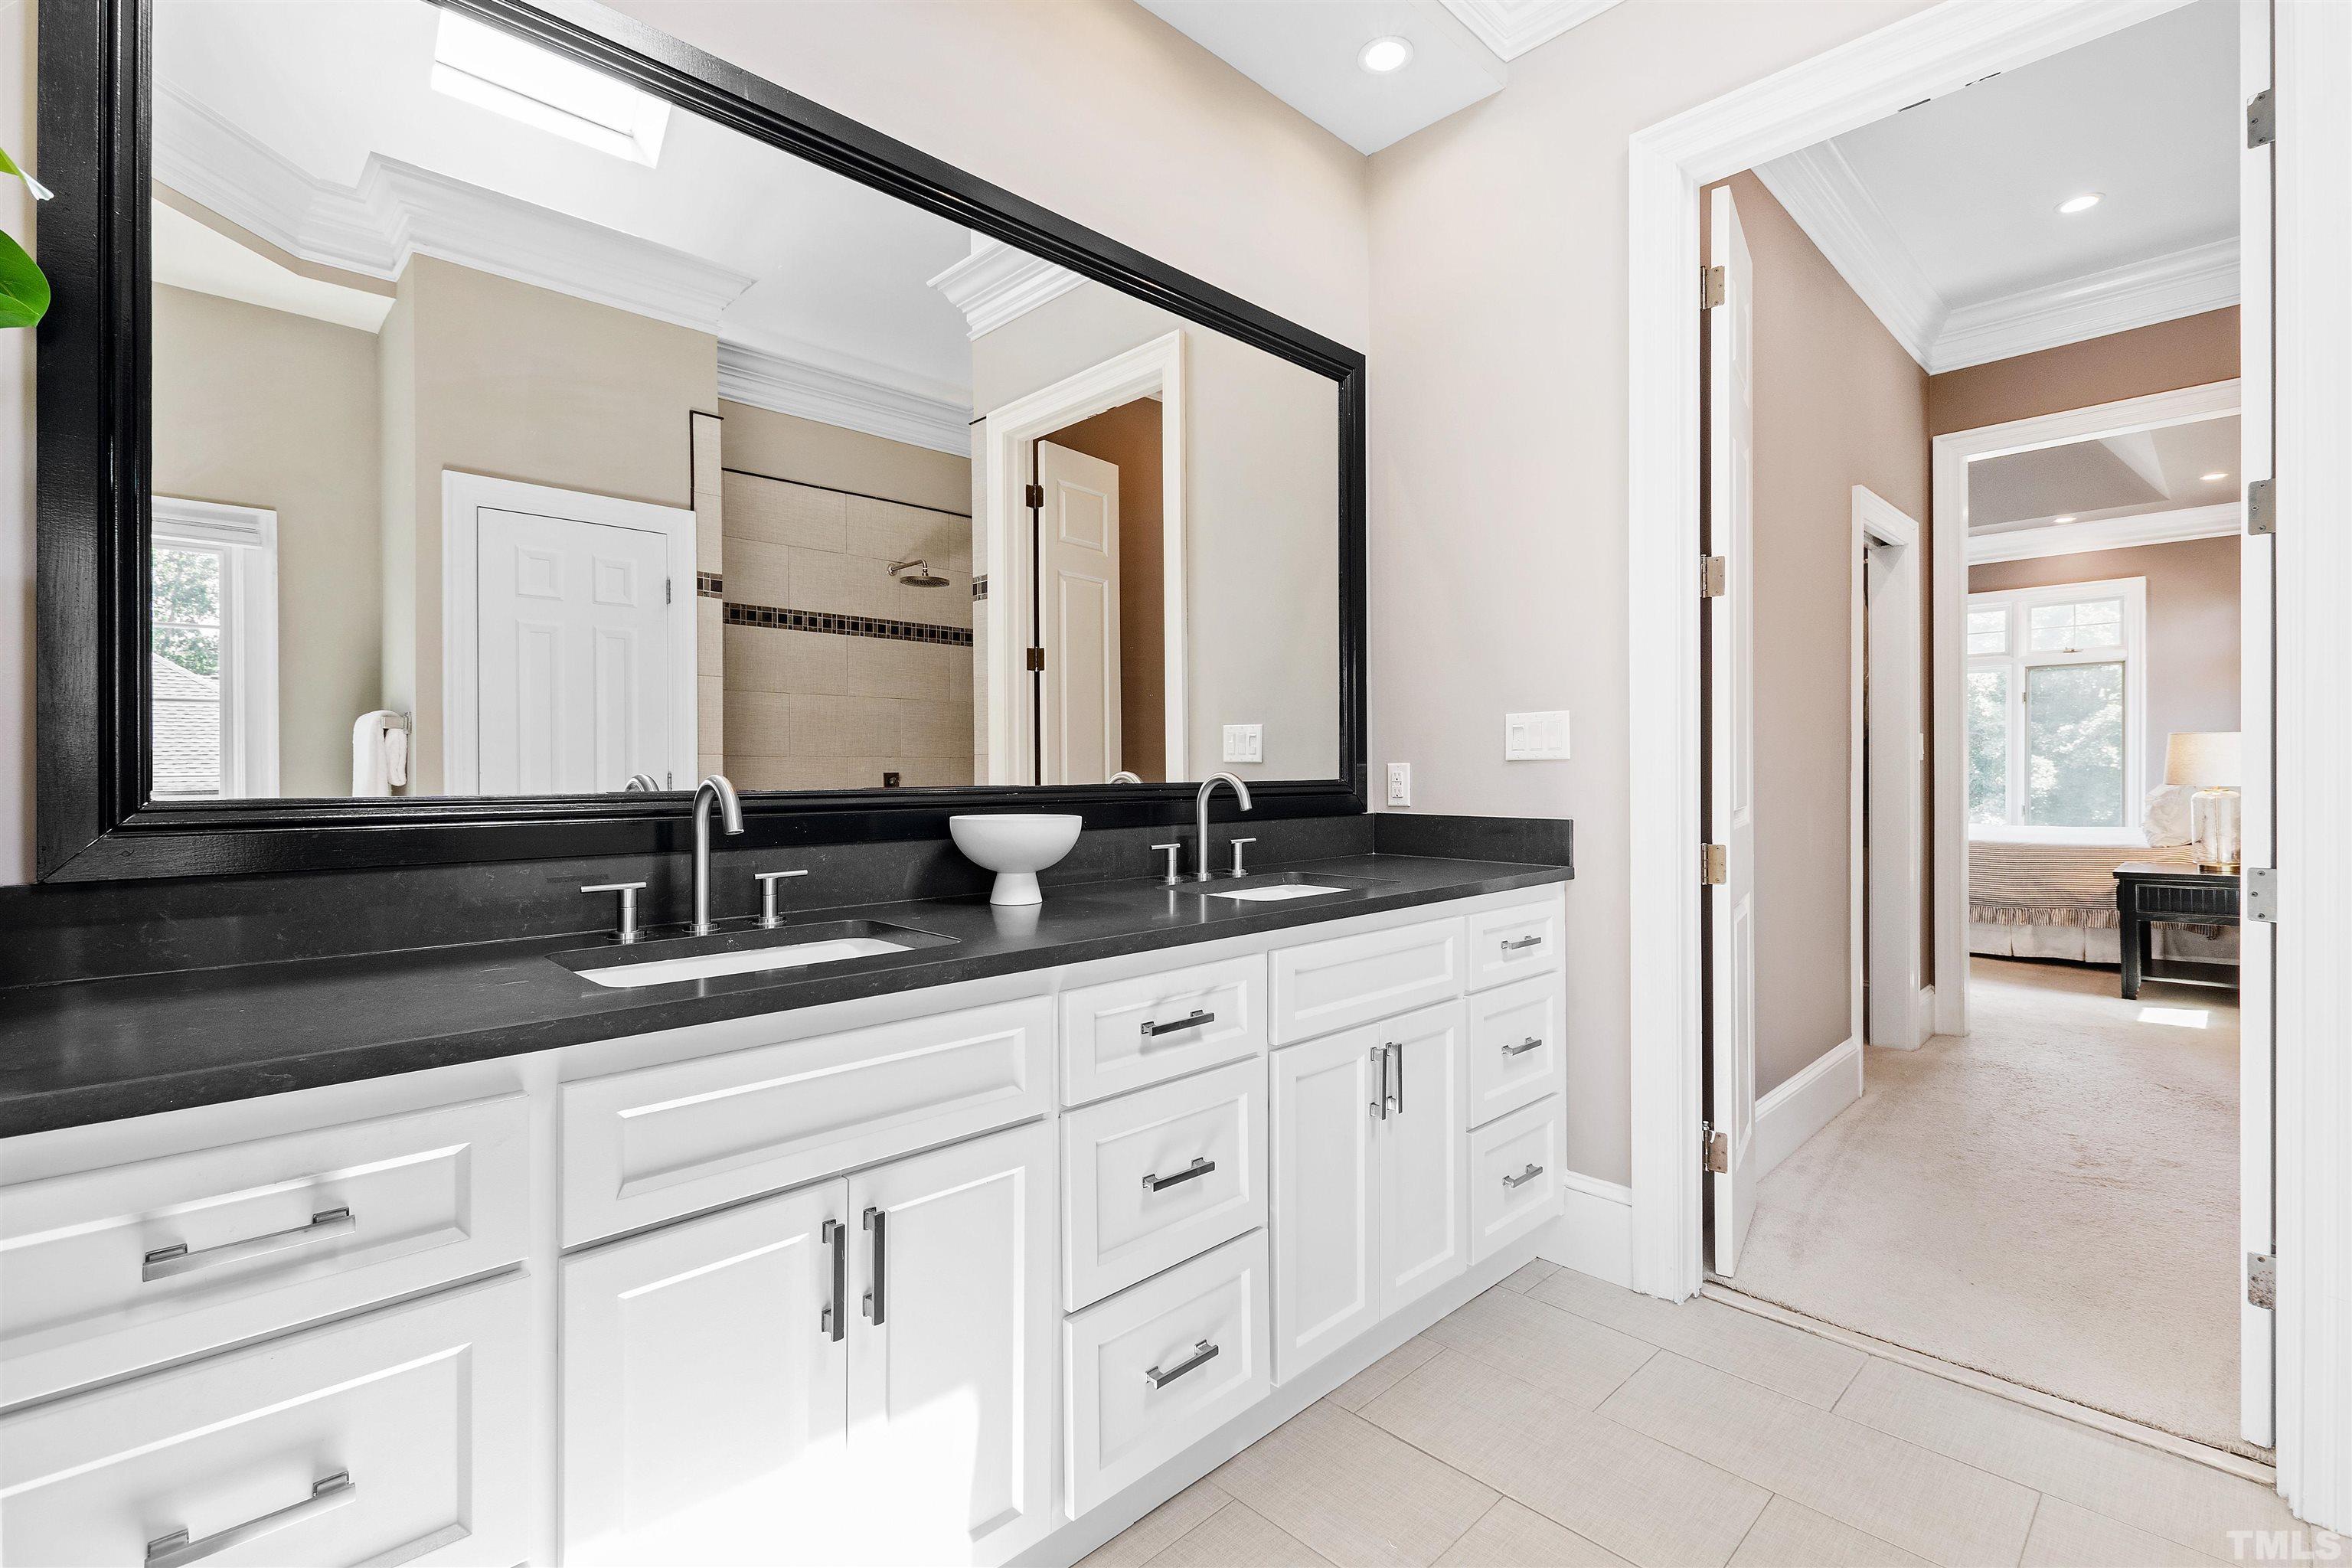 Dual vanities with soft-close drawers and quartz countertops